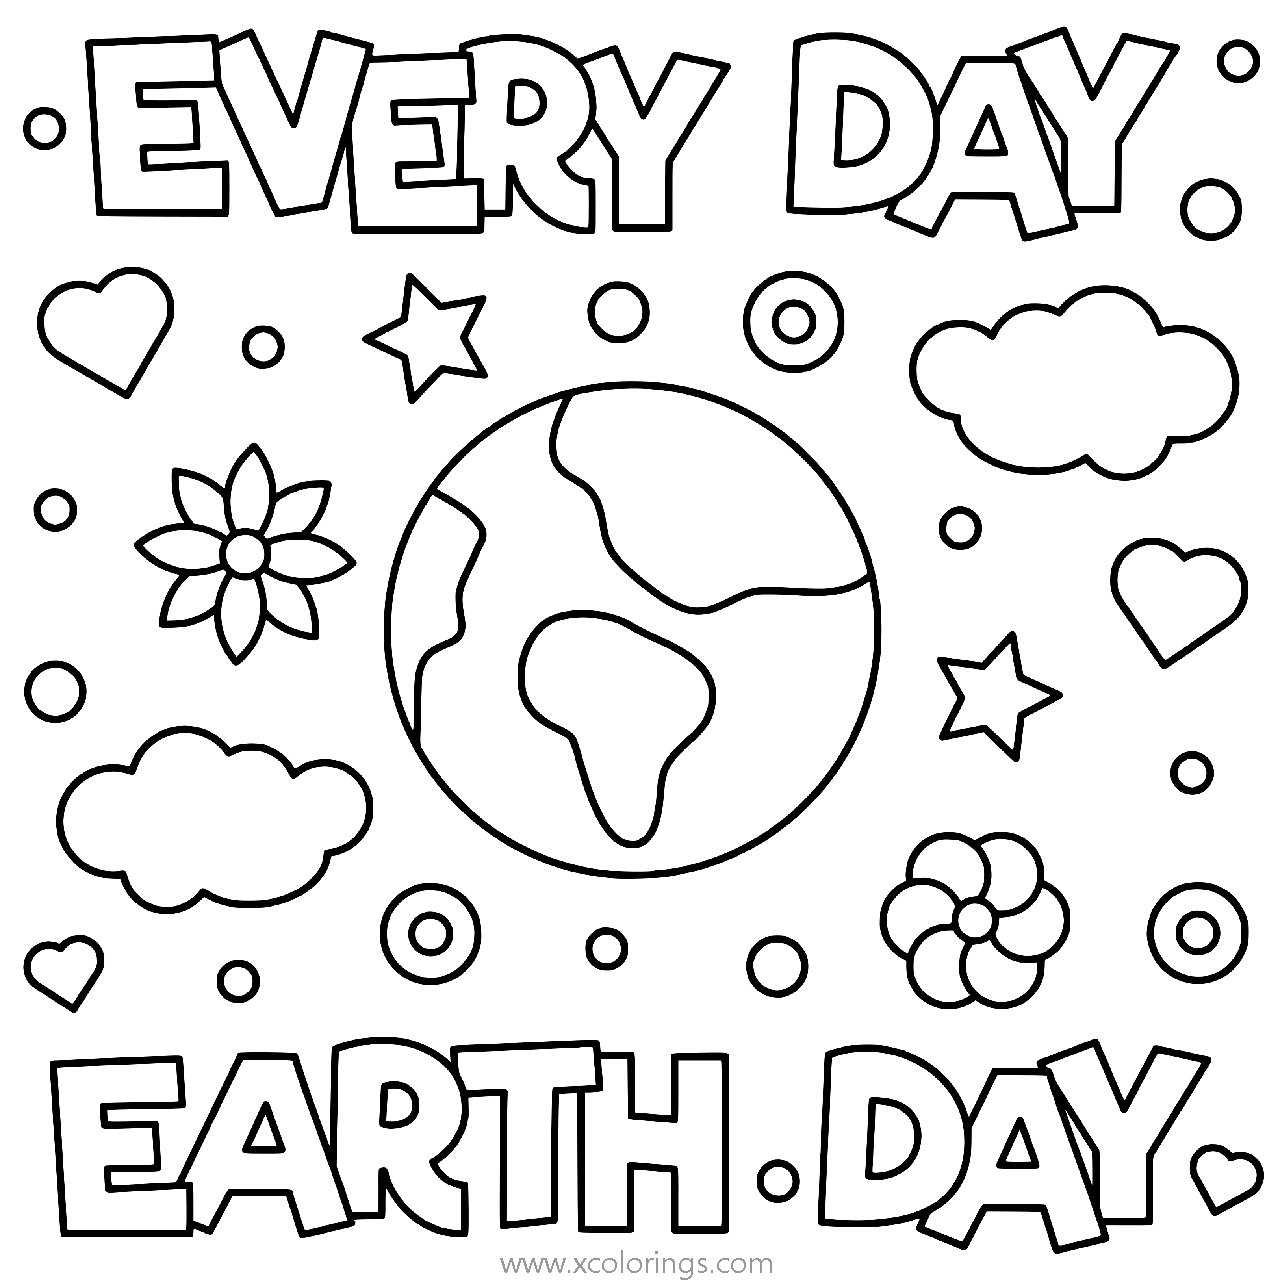 Free Simple Earth Day Coloring Pages for Kids printable